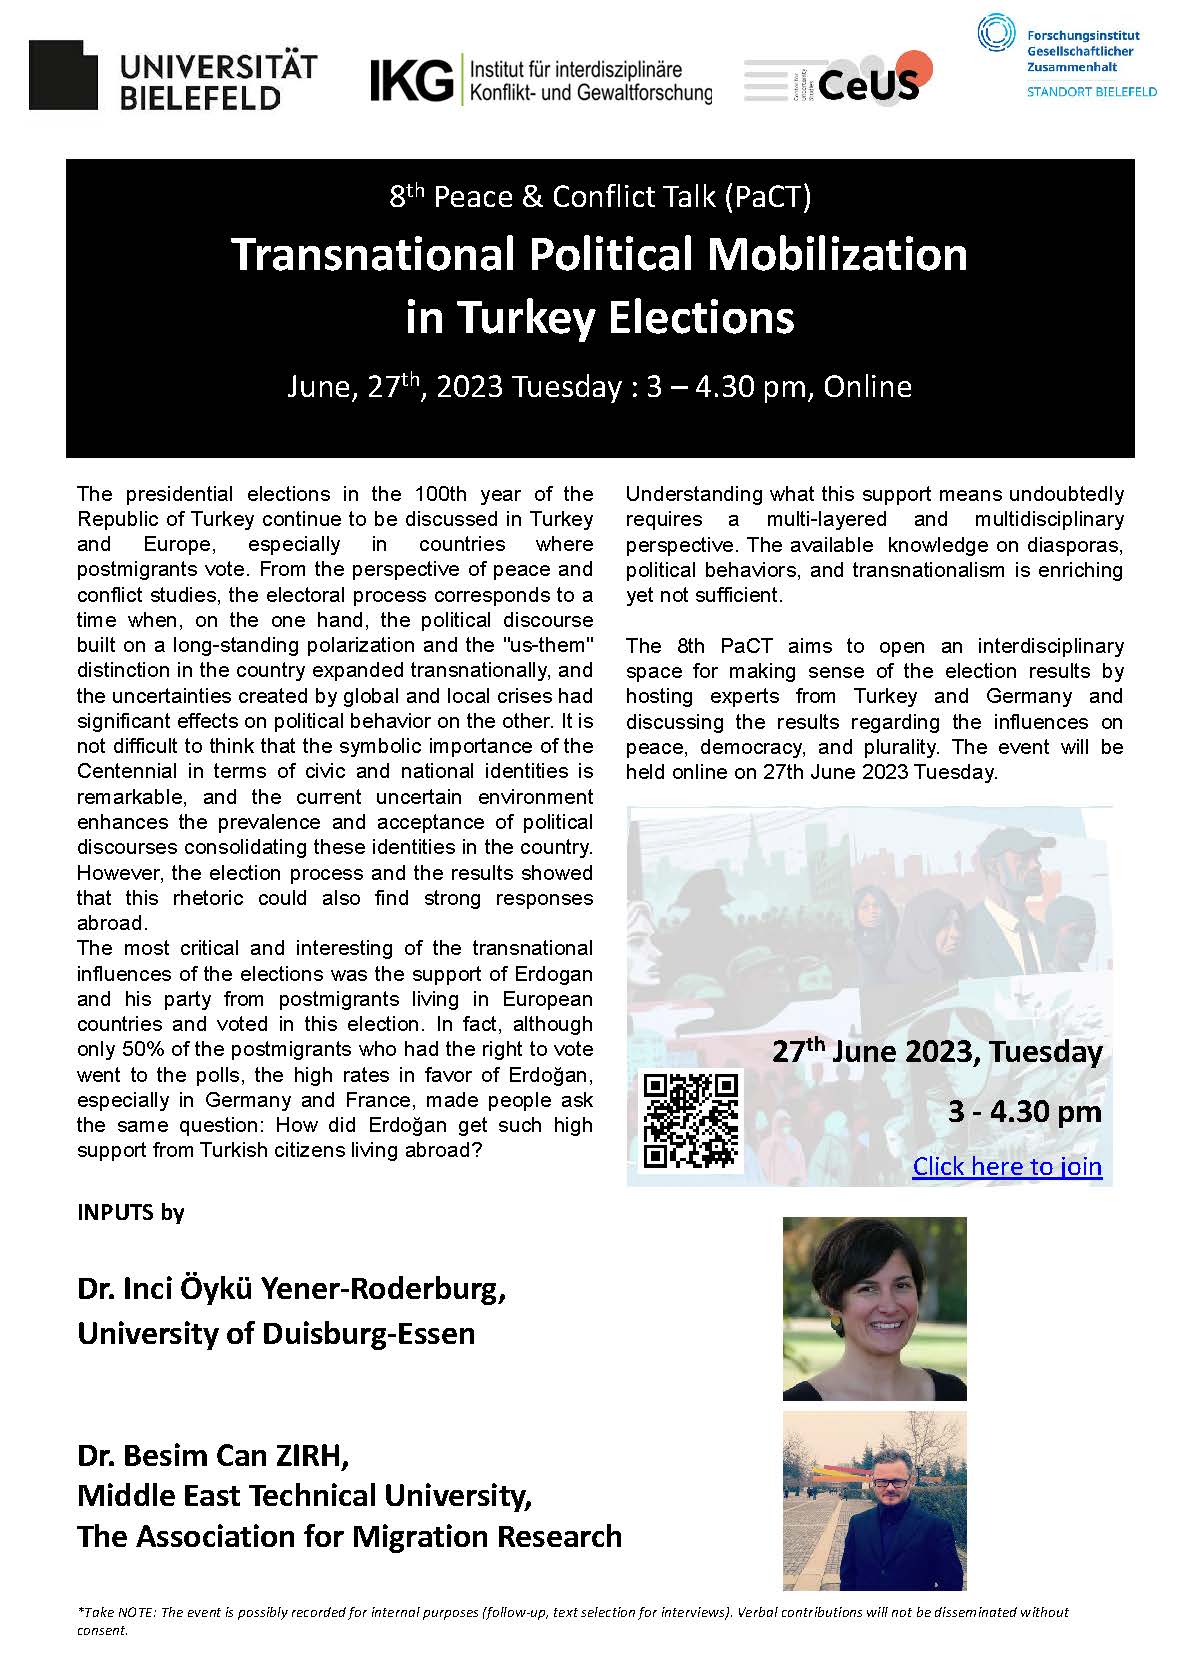 Transnational Political Mobilization in Turkey Elections